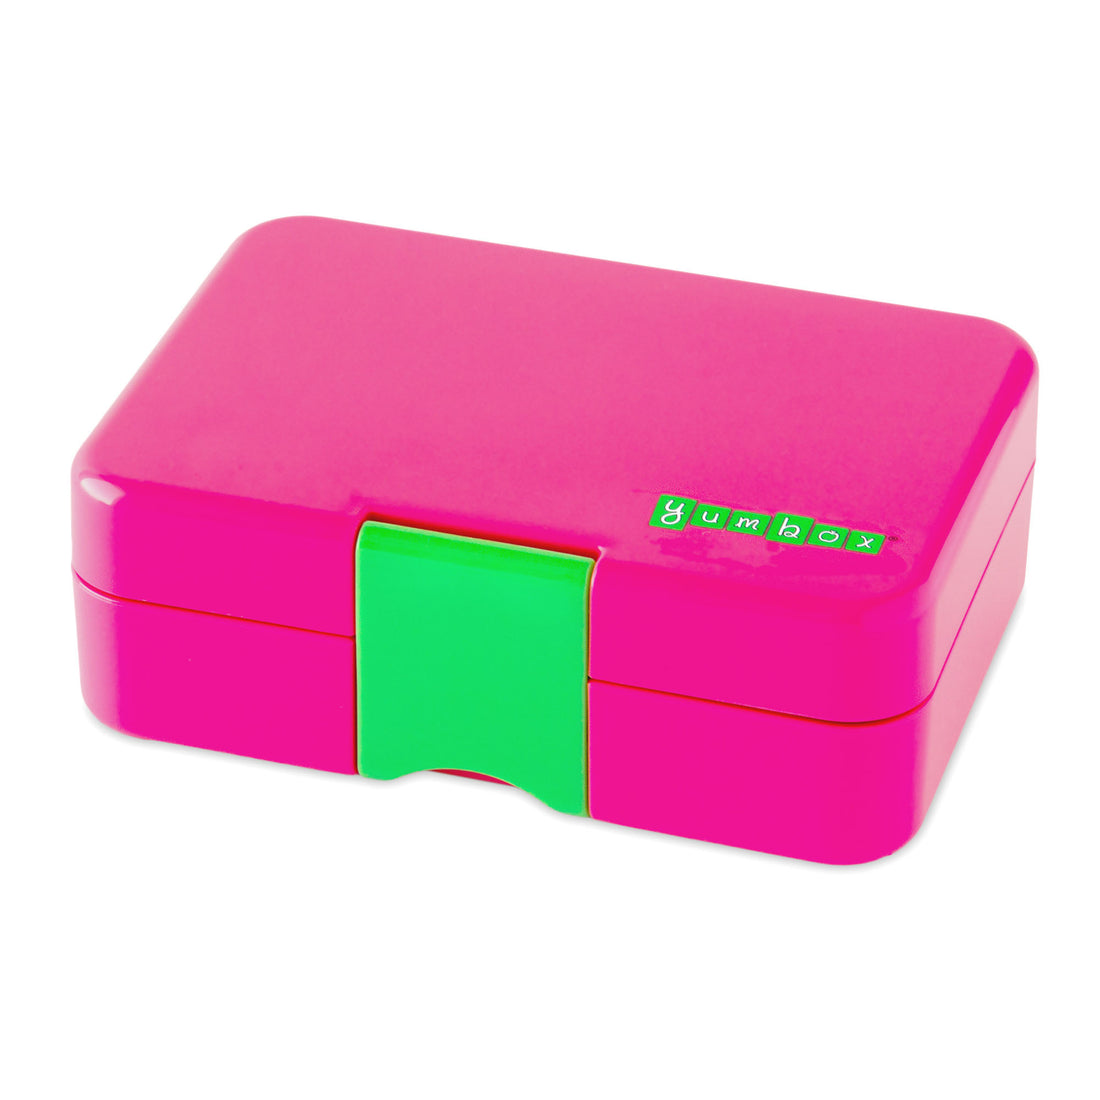 yumbox-mini-snack-cherie-pink-3-compartment-lunch-box- (2)